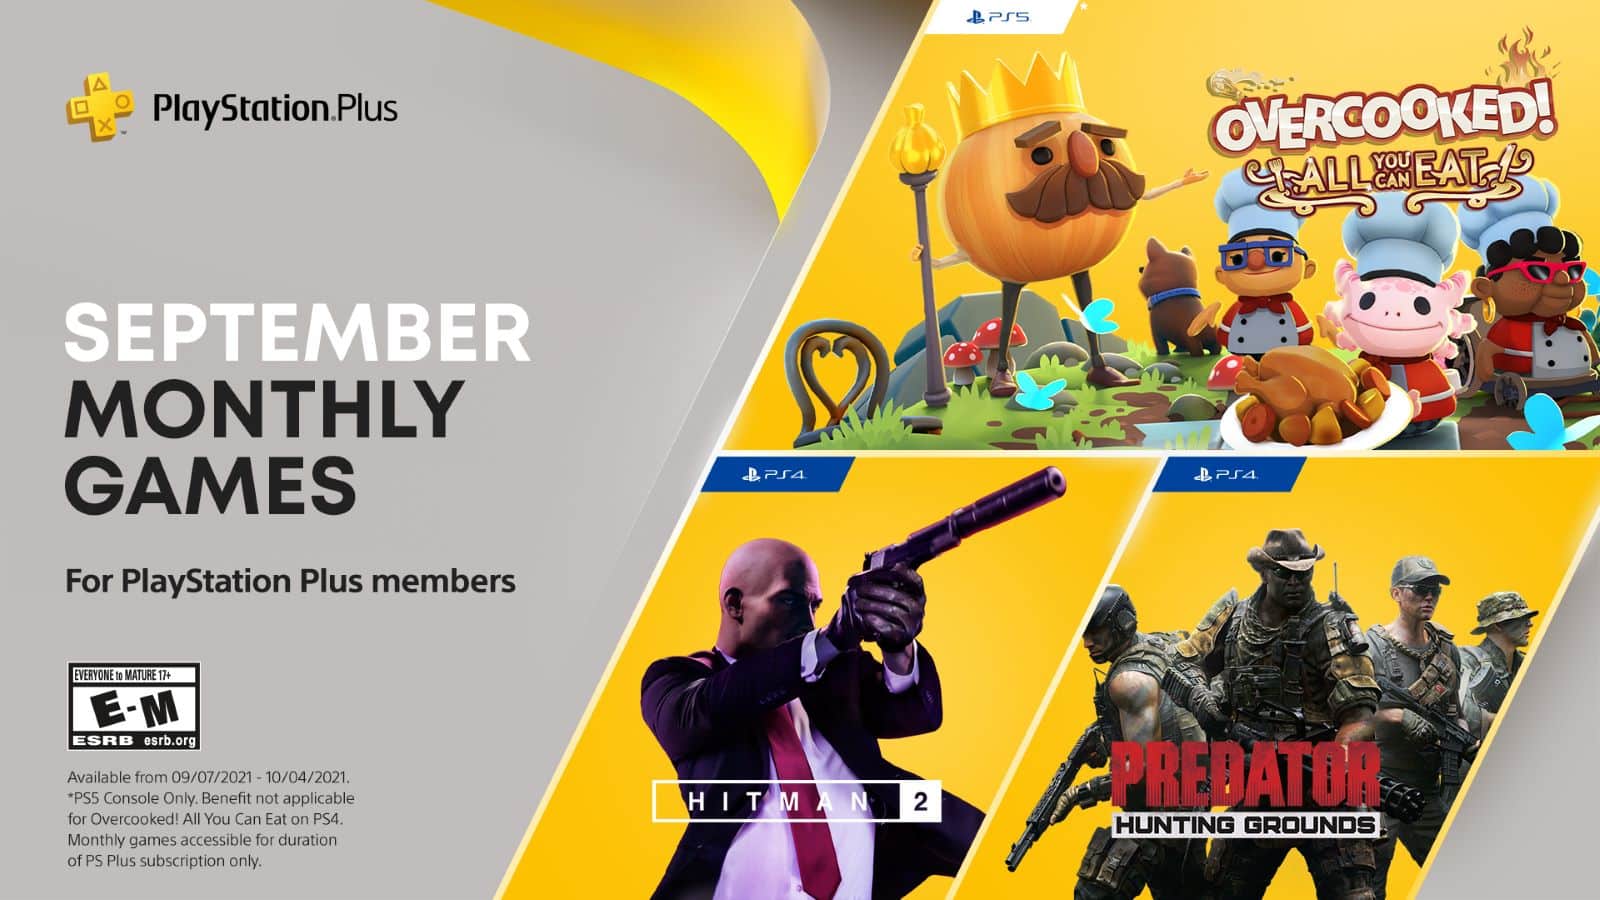 December's PlayStation Plus monthly games include Sable and